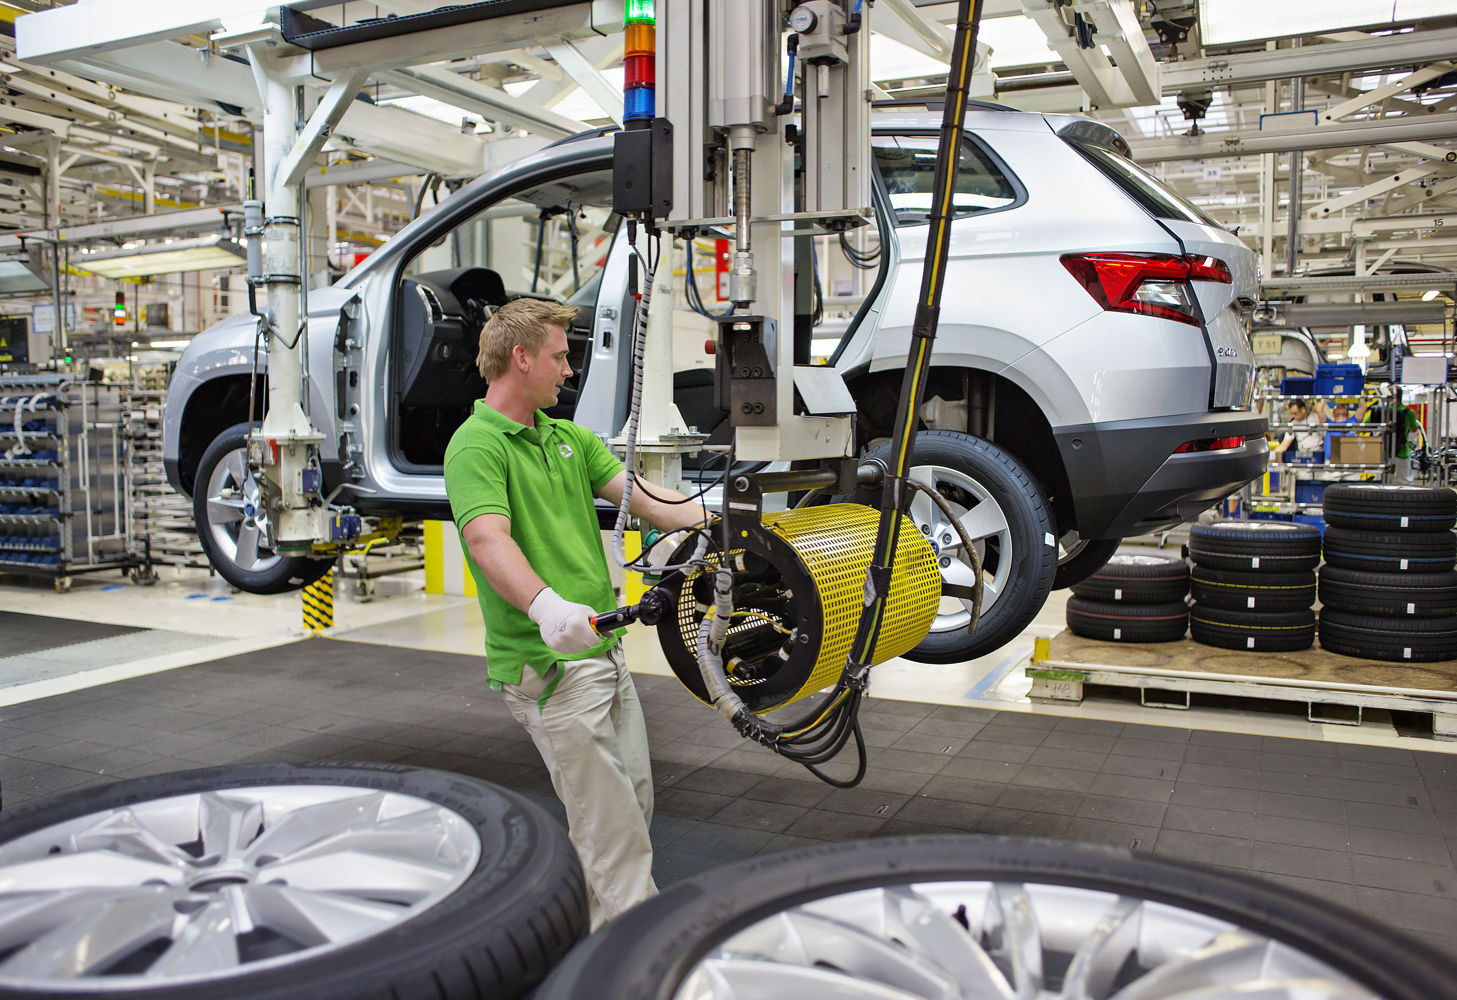 Kvasiny is one of three ŠKODA production sites in the Czech Republic. With a current workforce of 8,000 people, the plant is the largest industrial employer in the Hradec Králové region. The production facilities have been comprehensively extended and modernised in recent years.